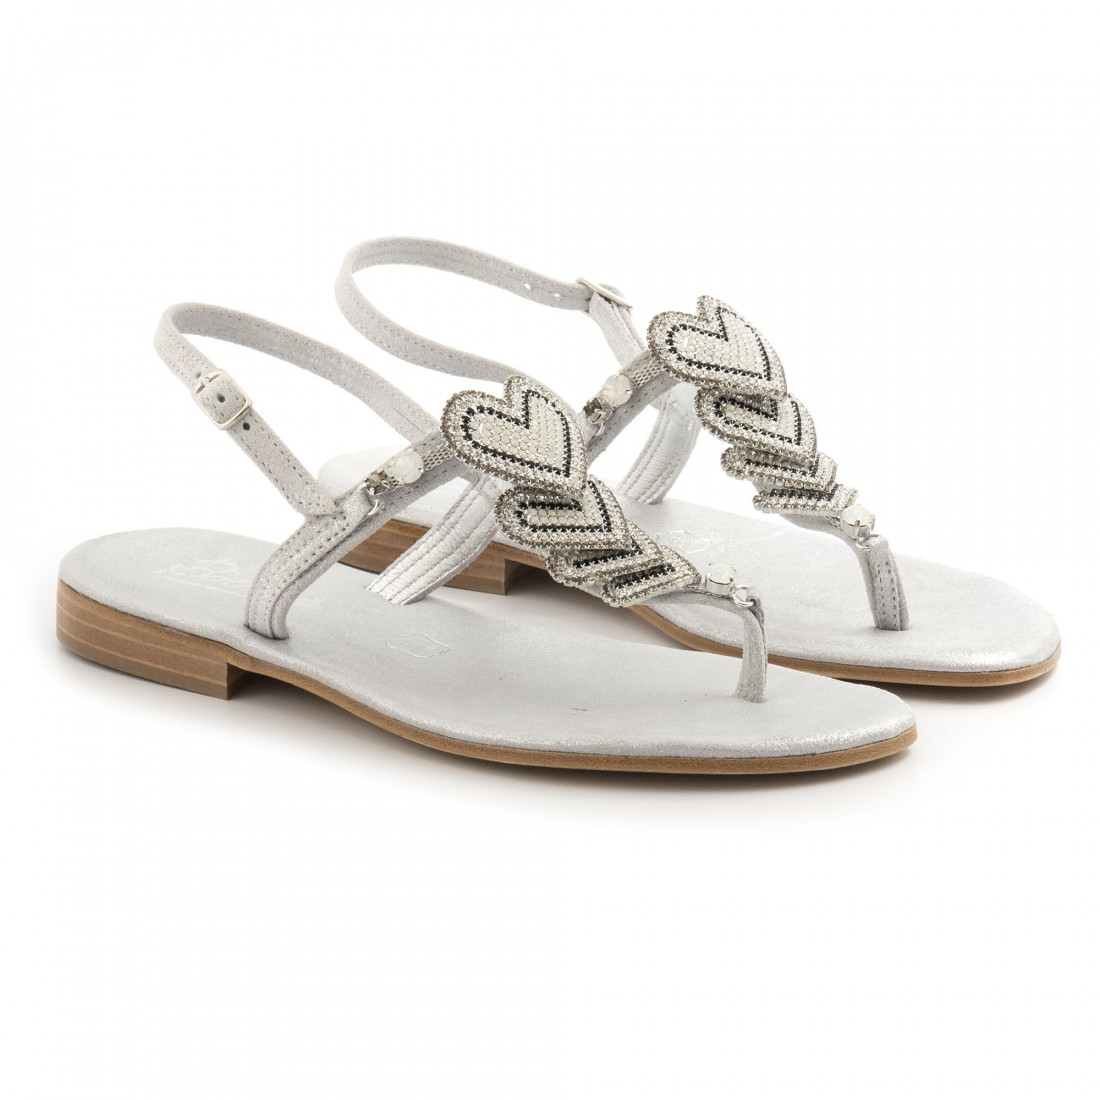 Silver Balduccelli flip flop sandals with hearts